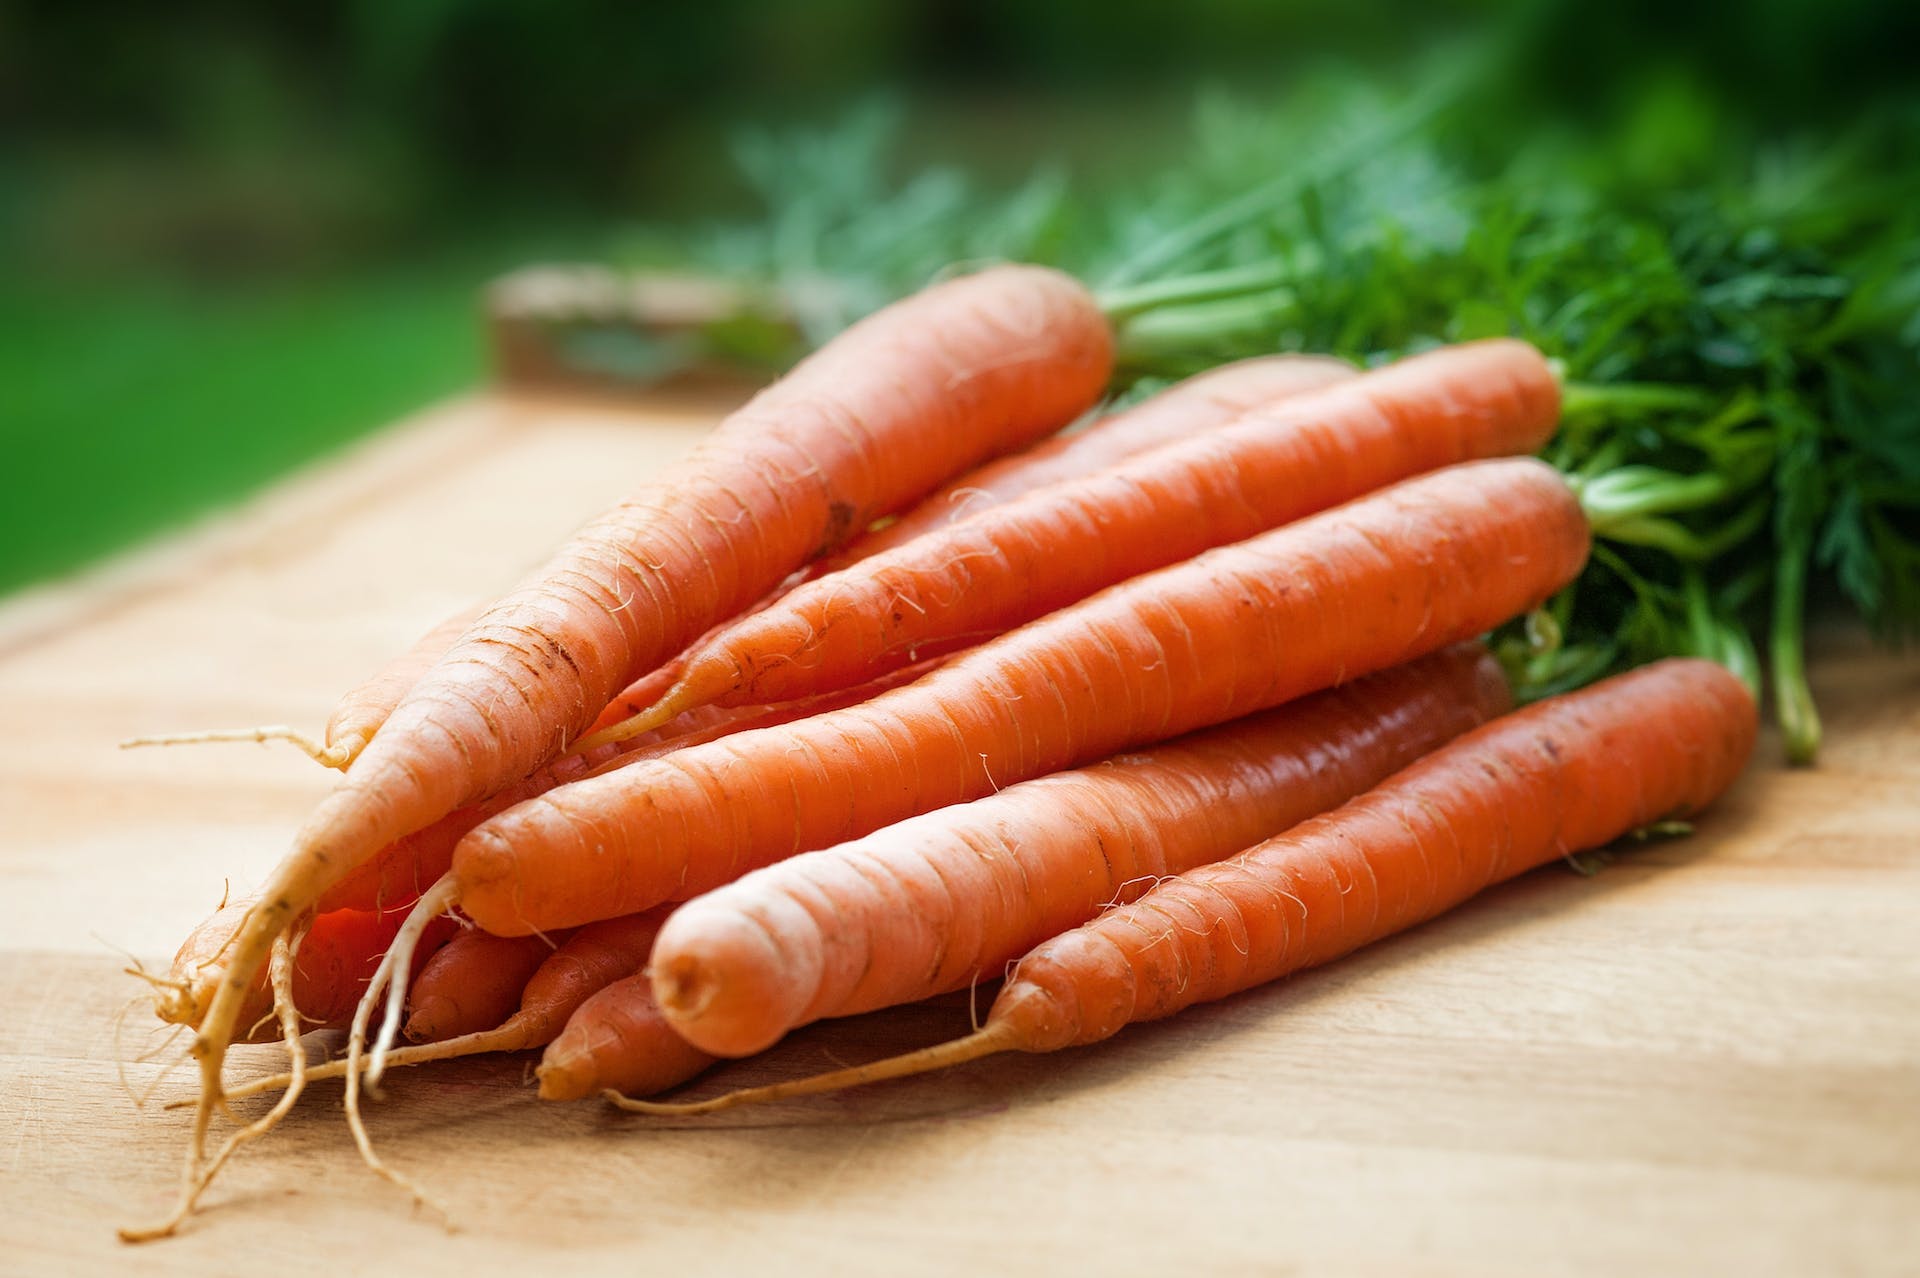 is carrot good for creatinine